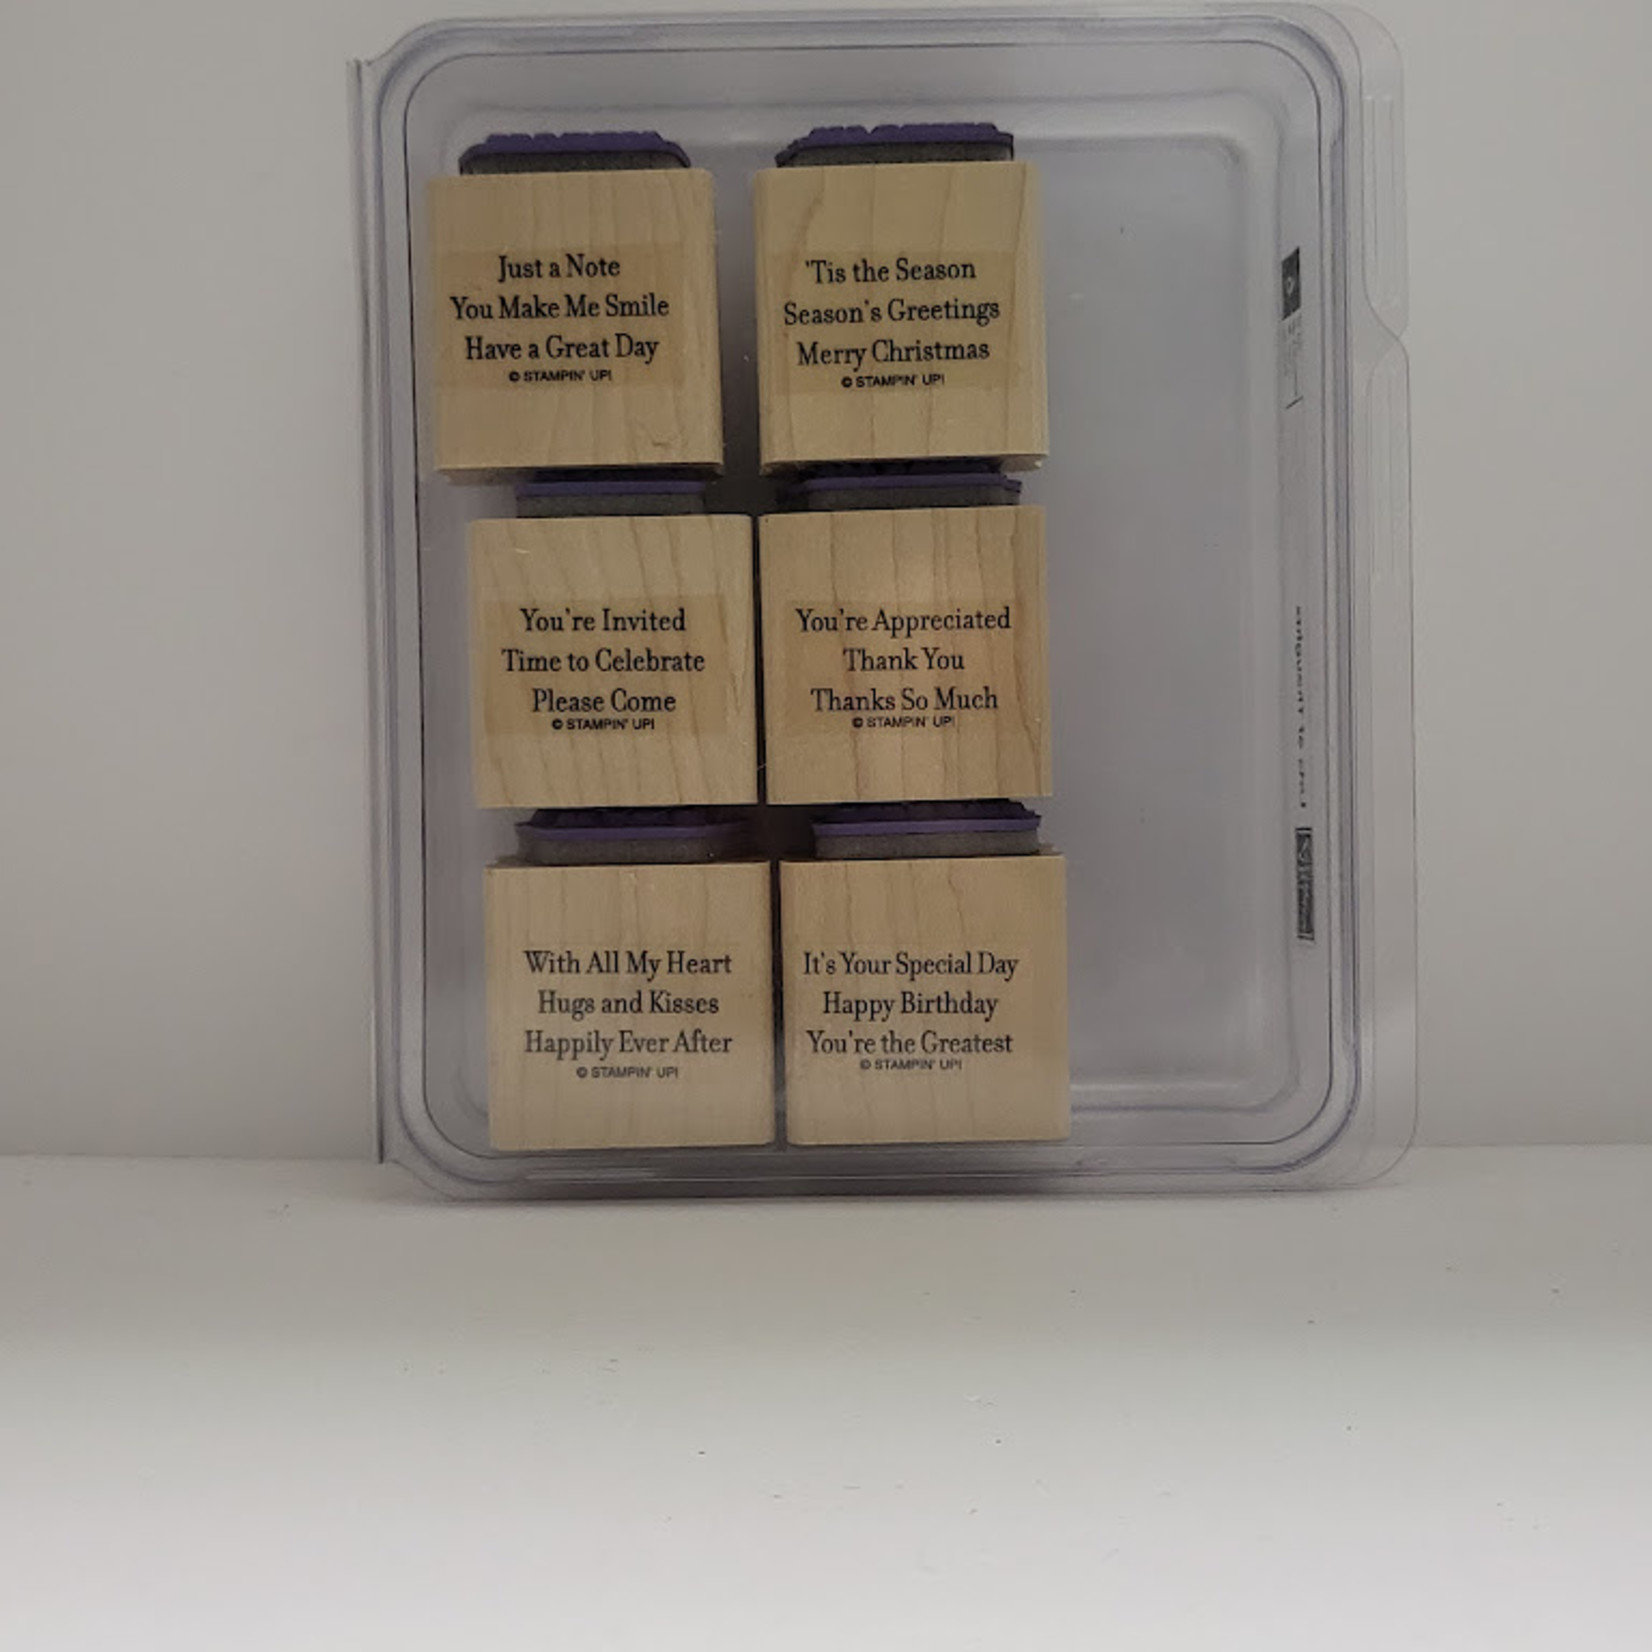 Stampin Up Wooden Stamps with clamshell cases (gently used) You choose!